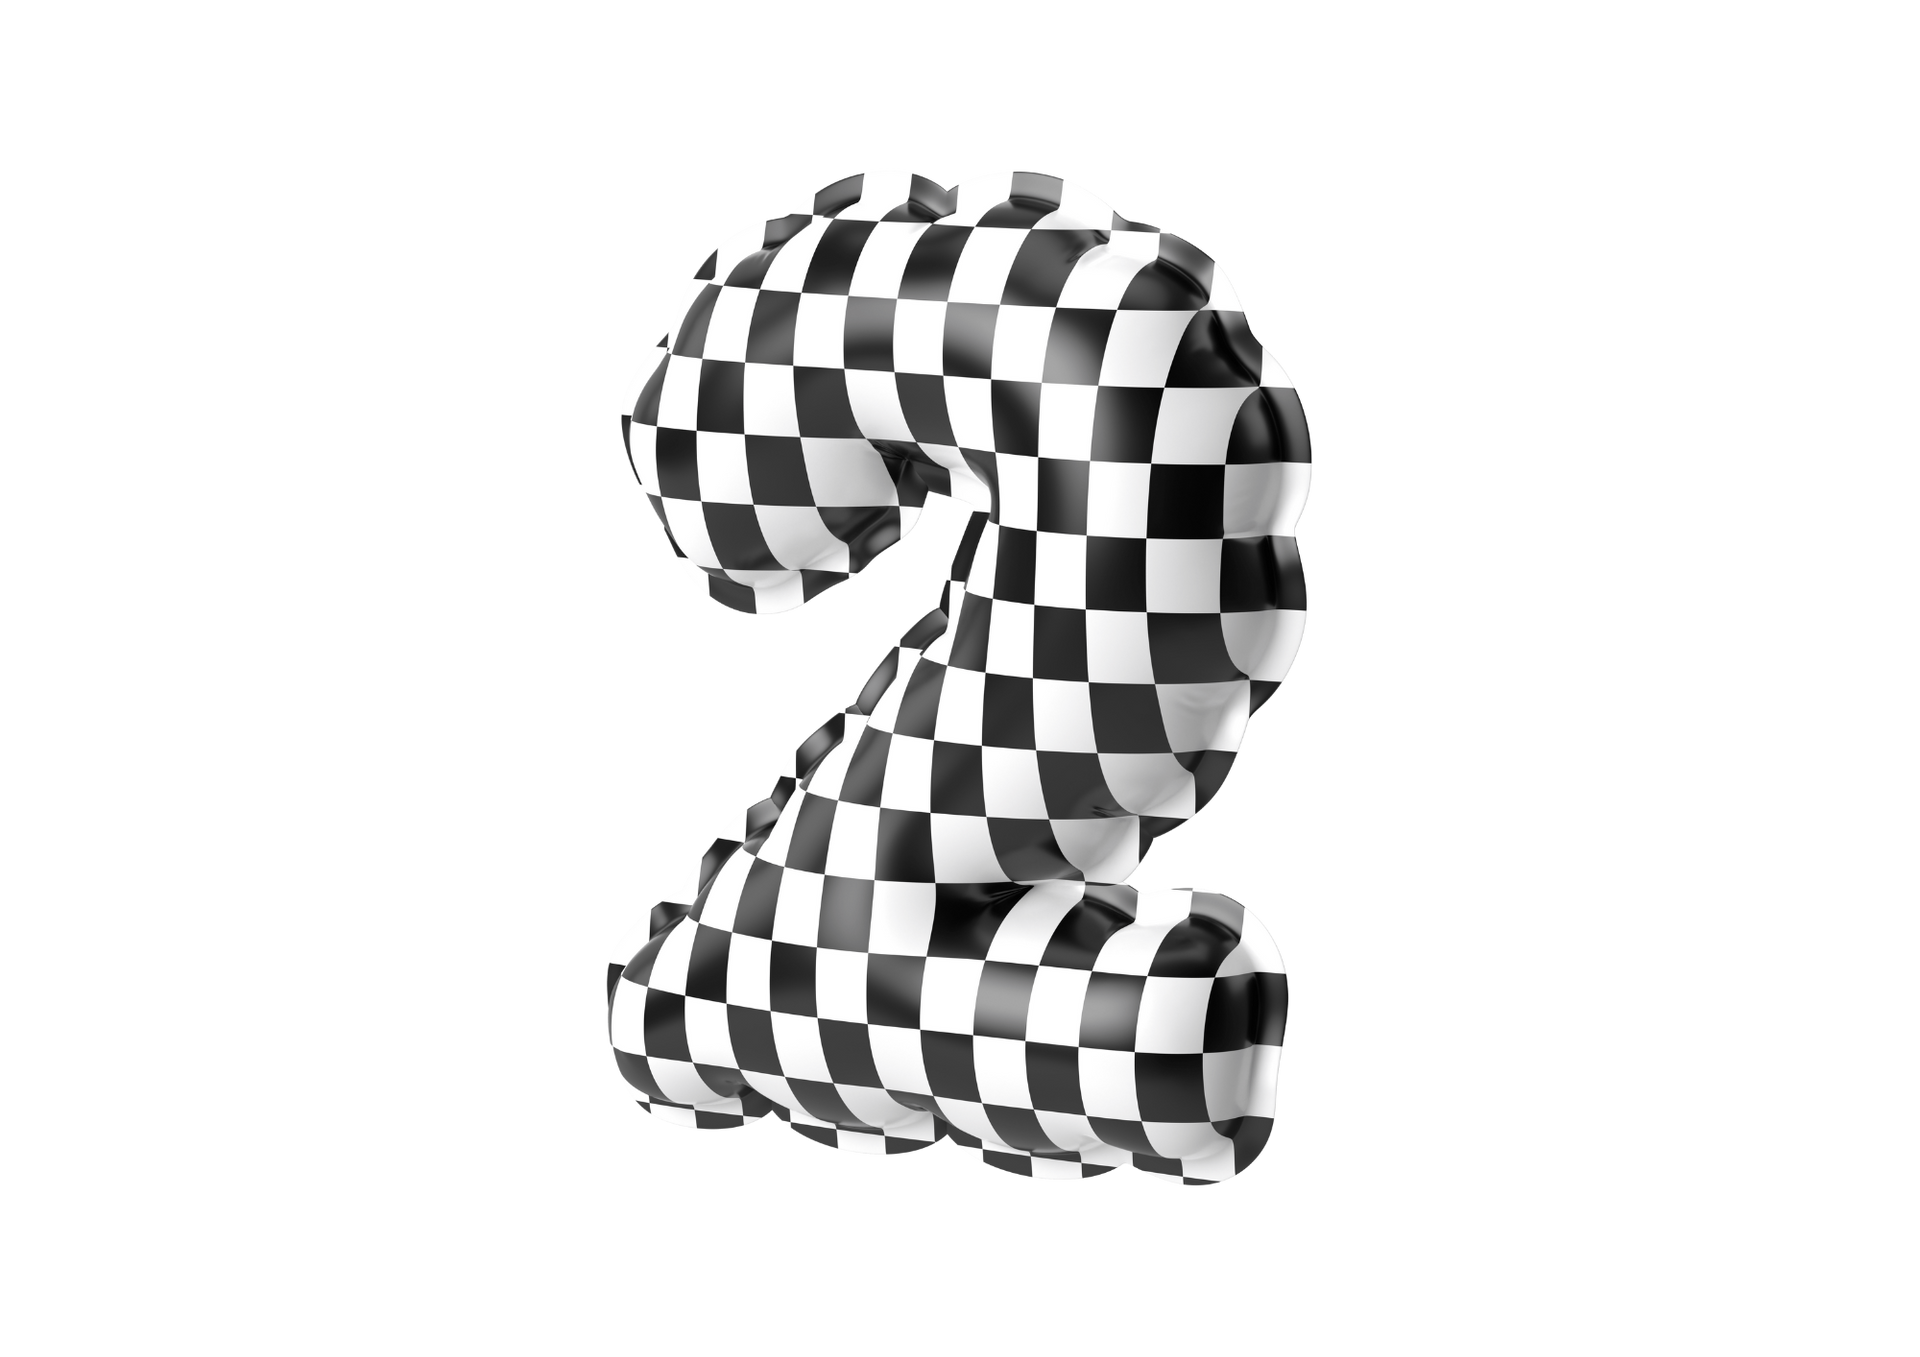 A black and white checkered balloon in the shape of the number two.